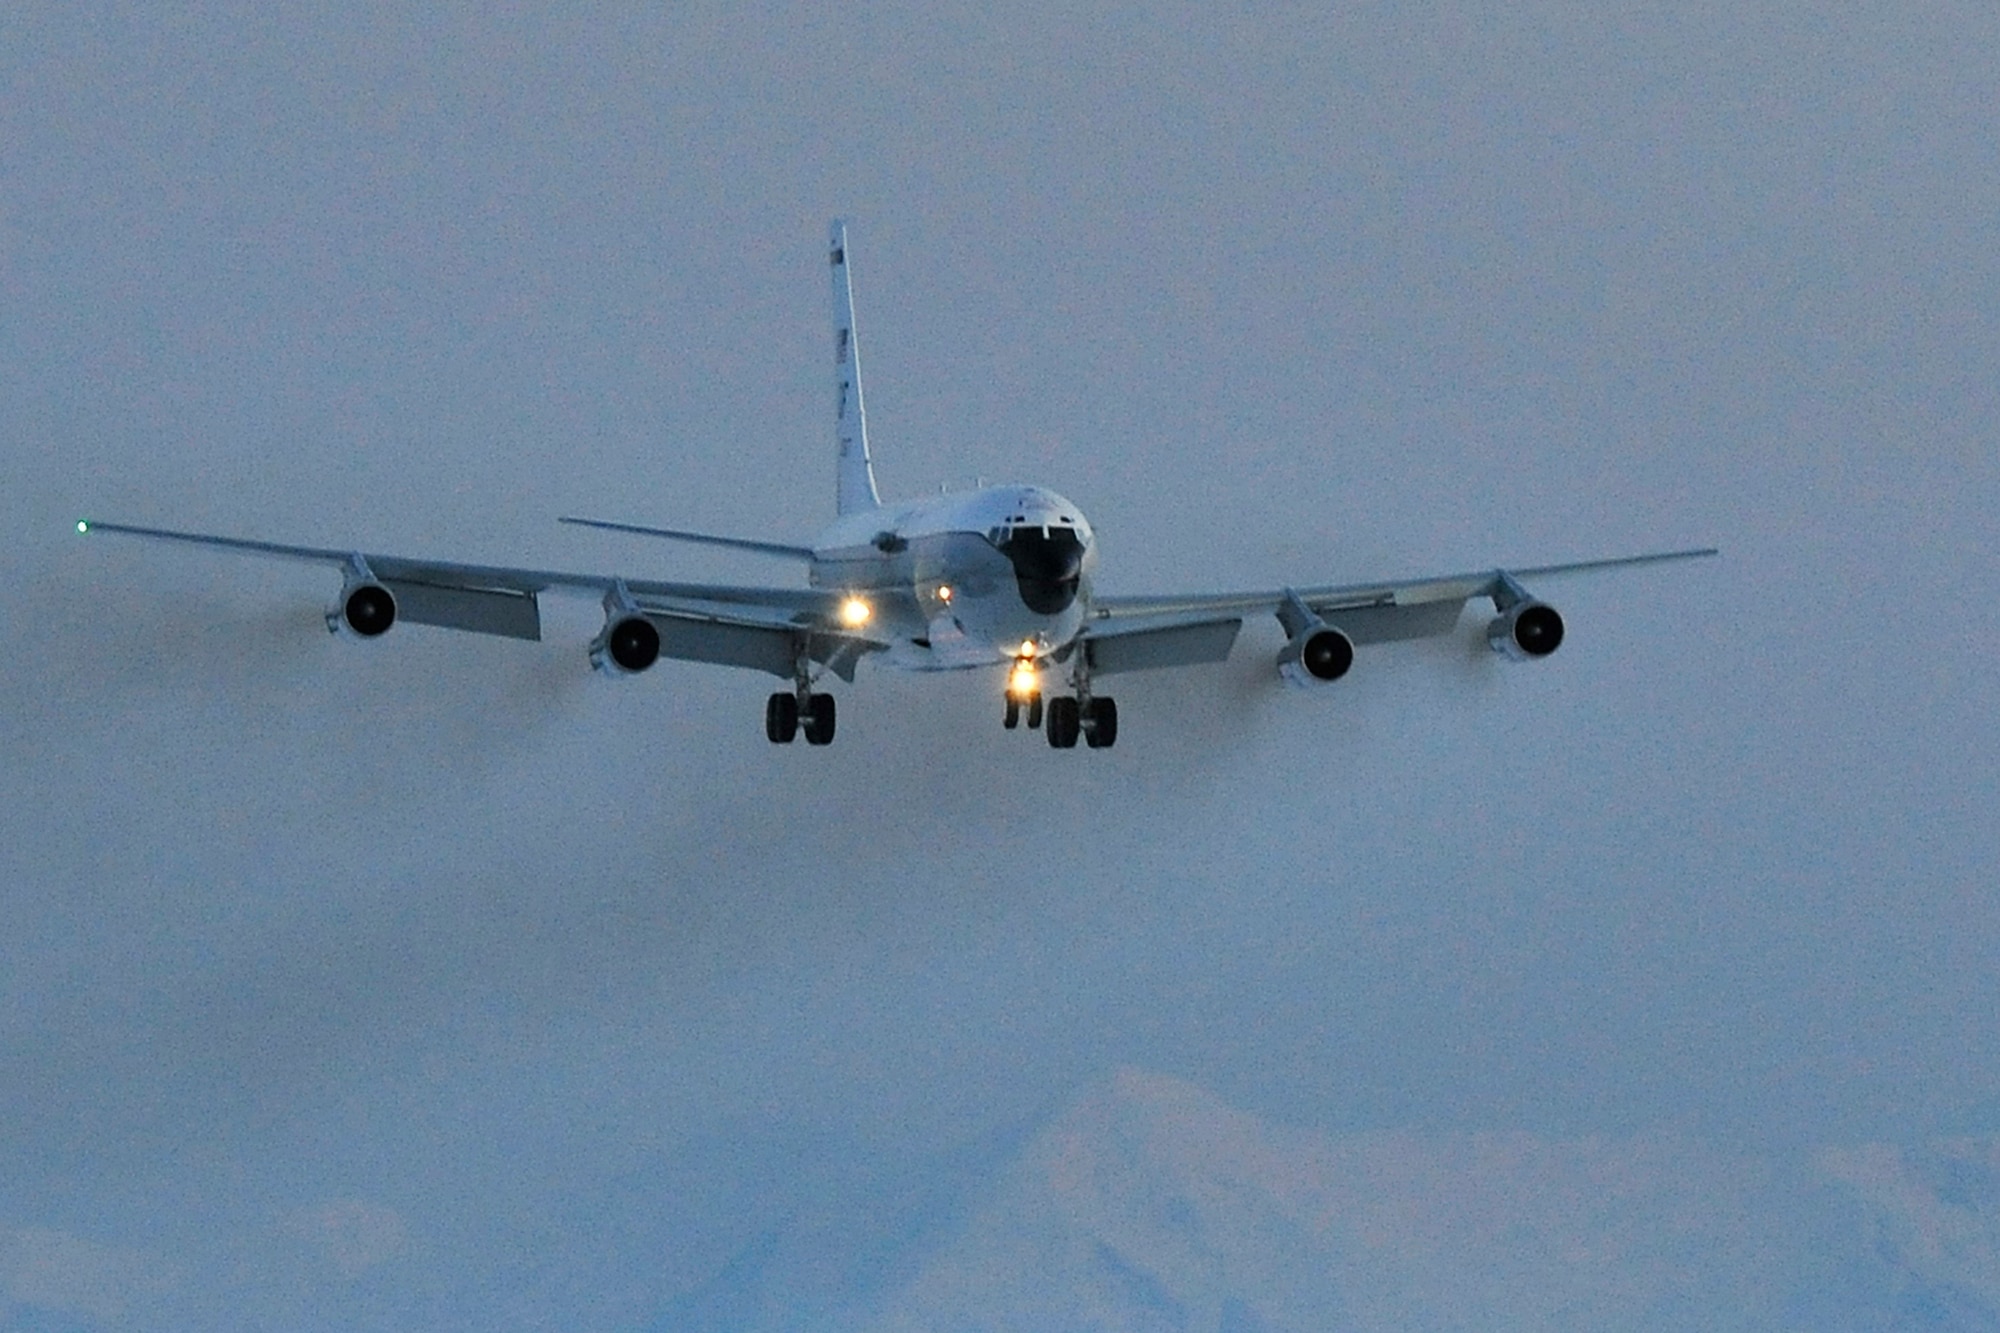 EIELSON AIR FORCE BASE, Alaska -- A WC-135 Constant Phoenix from the 45th Reconnaissance Squadron prepares to land after flying a mission supporting Operation Tomodachi. The WC-135 is an atmospheric collection aircraft that was tasked with collecting air samples in international airspace over the Pacific as part of the Defense Department?s disaster relief effort in response to Japan?s March 11 earthquake and tsunami. The Constant Phoenix team was in Alaska for nearly six weeks. (Air Force photo by Staff Sgt. Christopher Boitz)